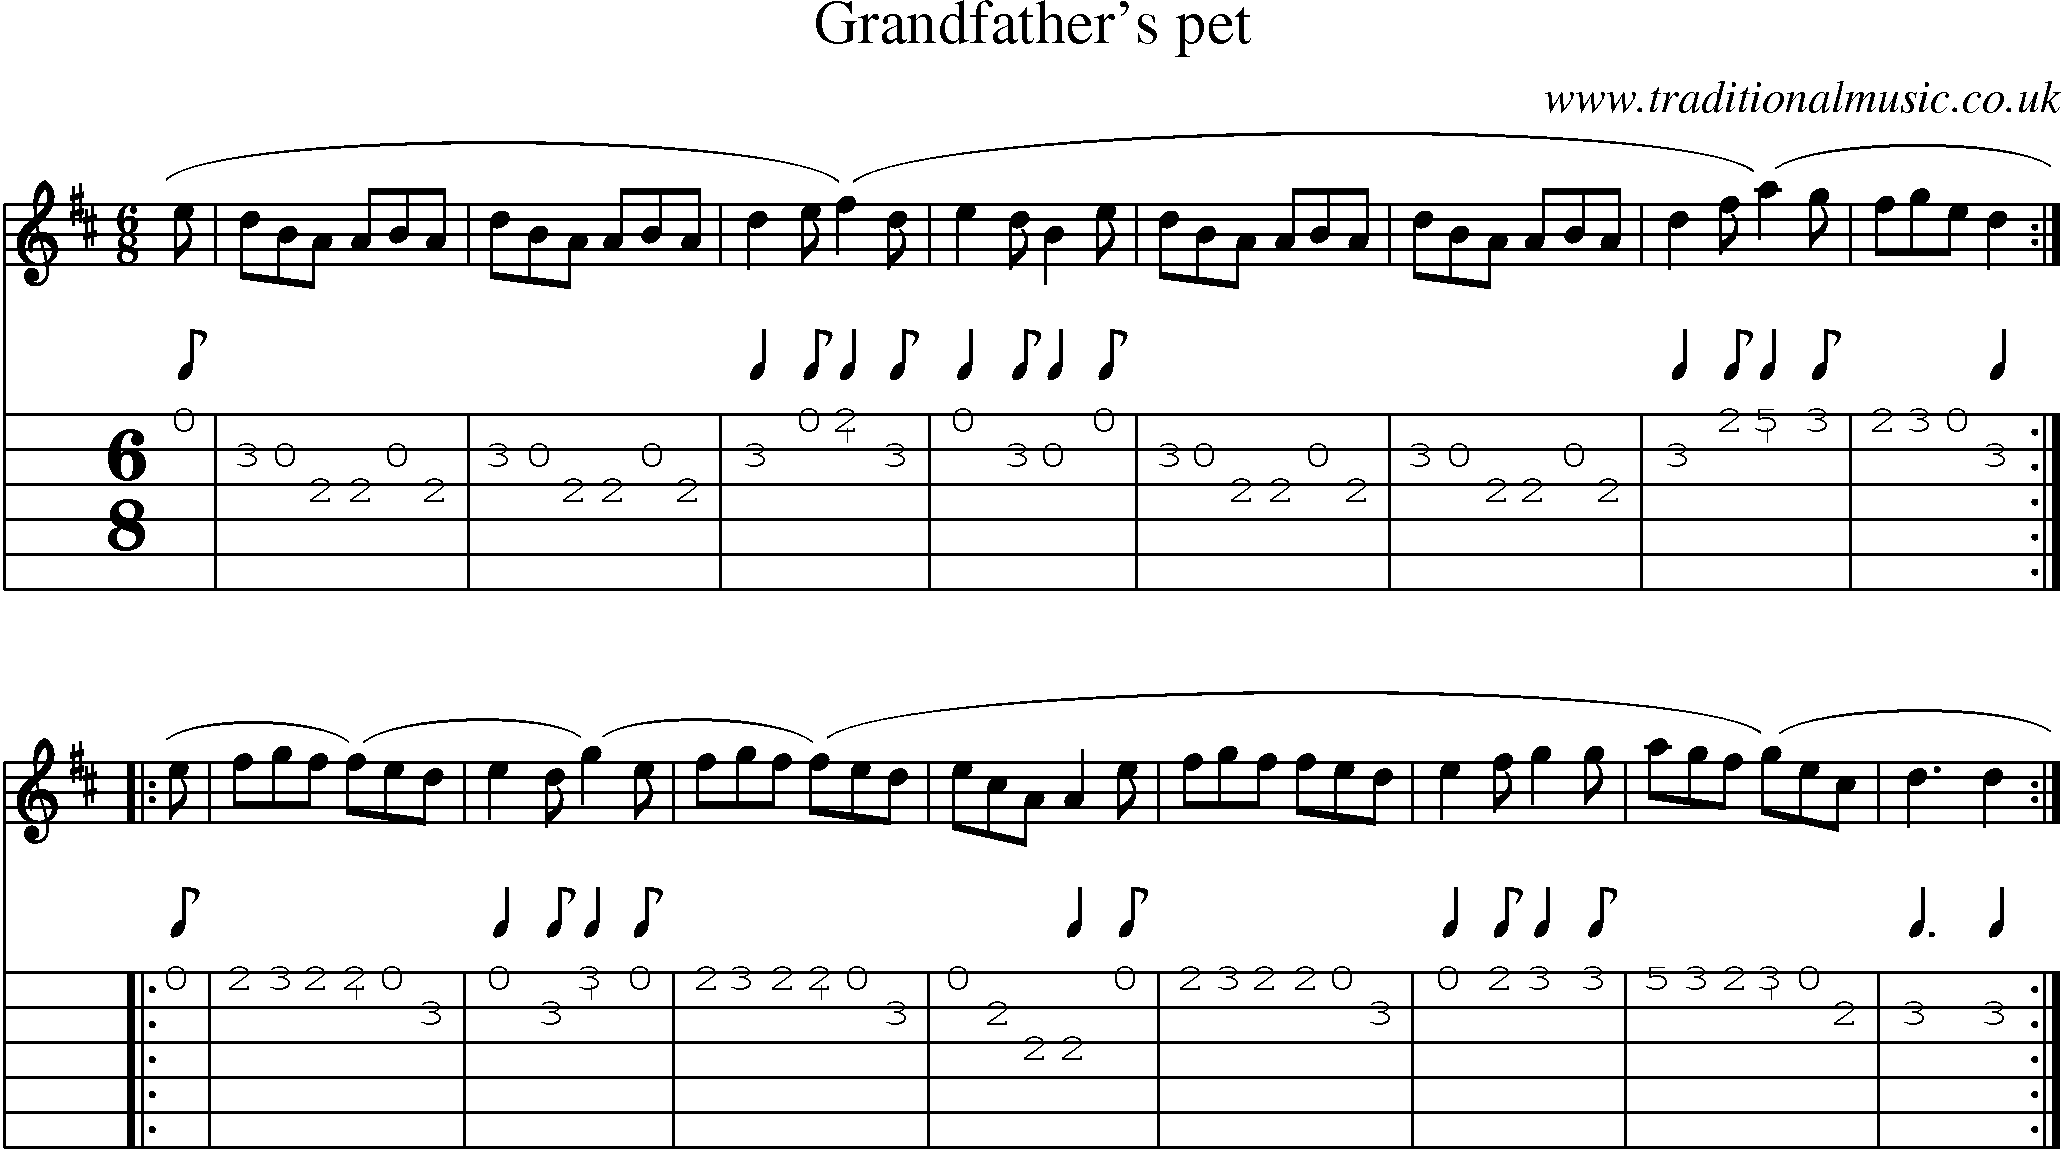 Music Score and Guitar Tabs for Grandfathers Pet